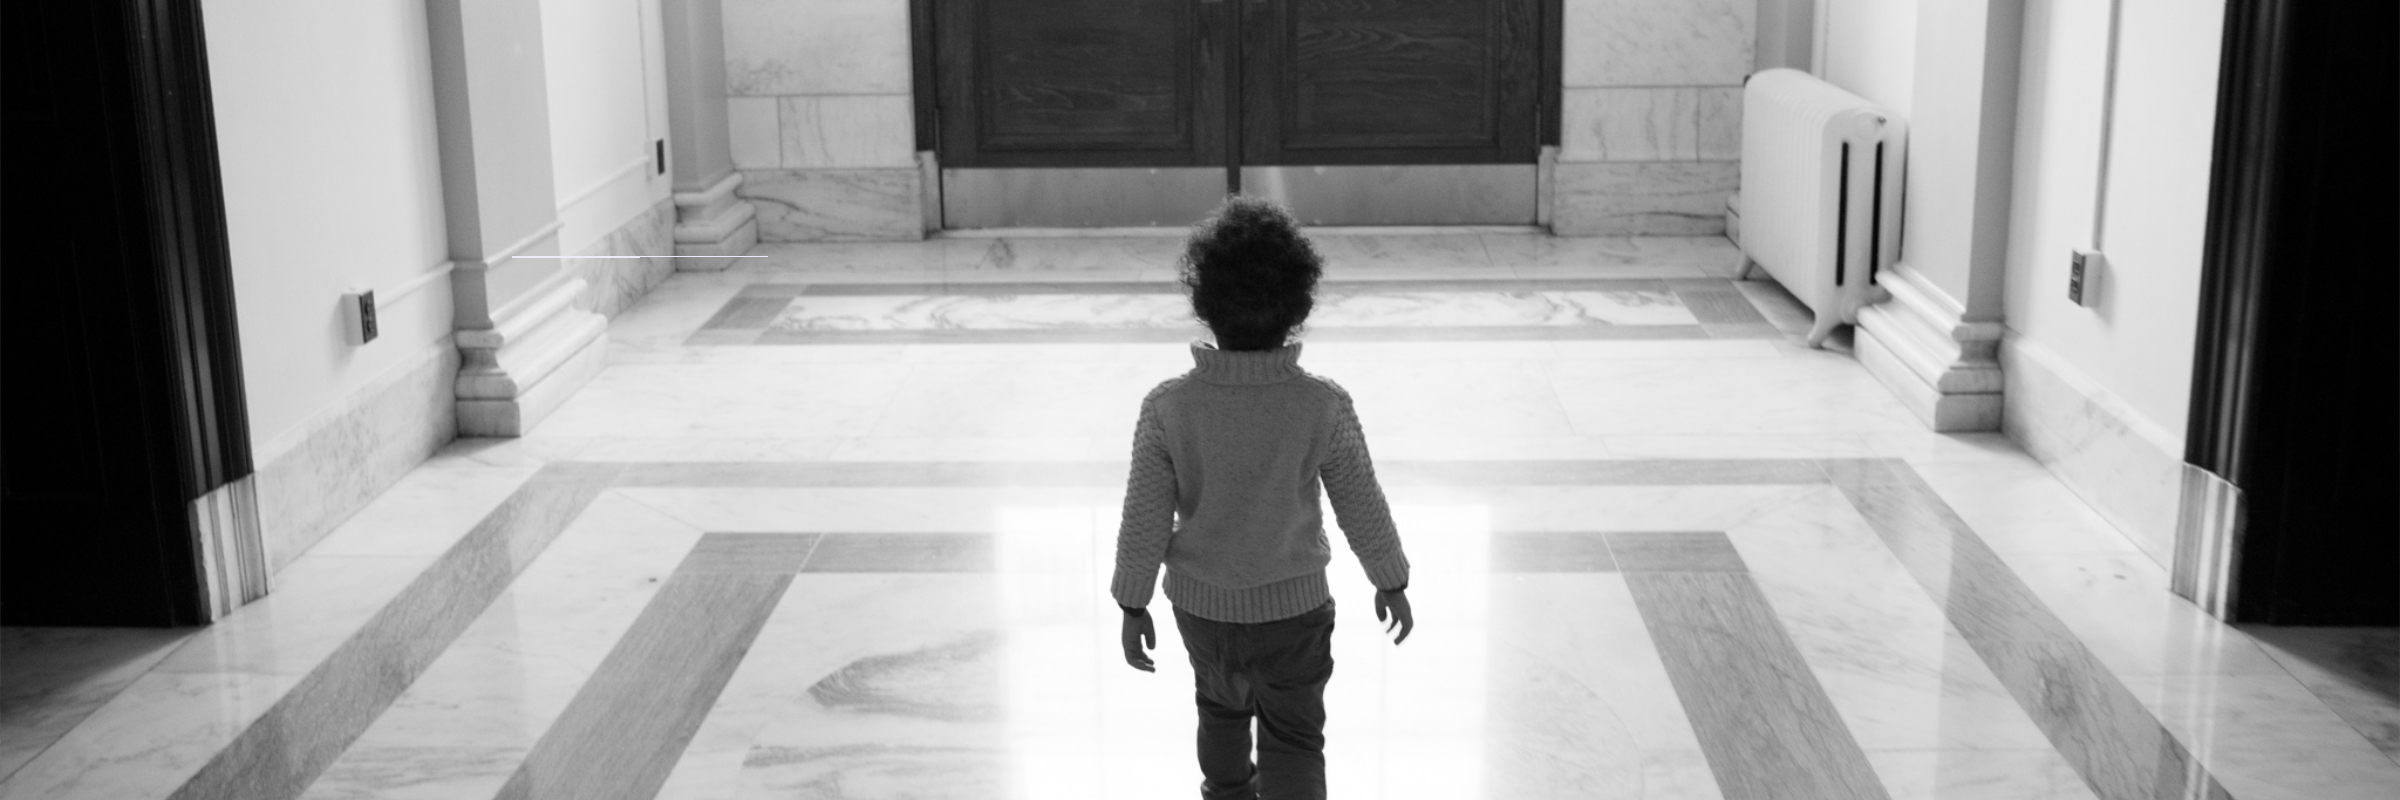 Tell Congress Stop Budget Cuts on America's Children Youth and Families